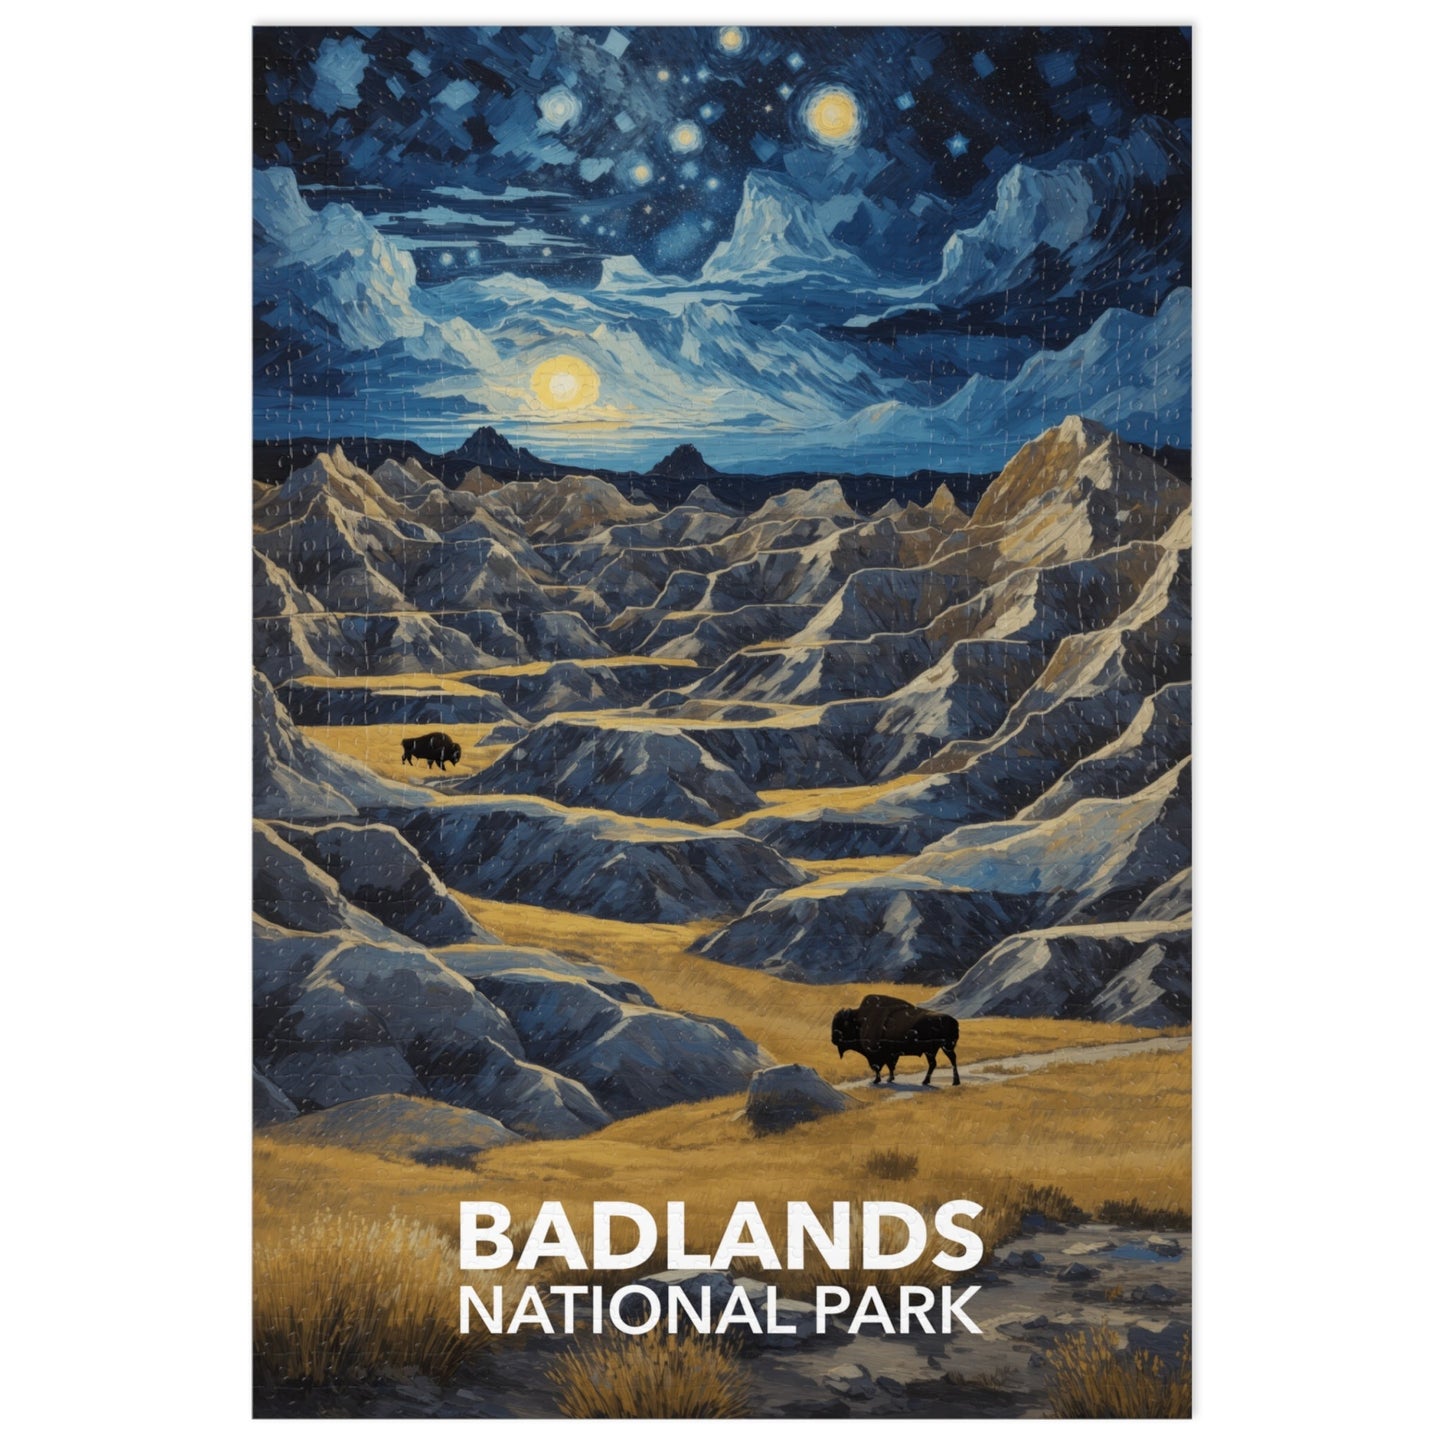 Badlands National Park Jigsaw Puzzle - The Starry Night